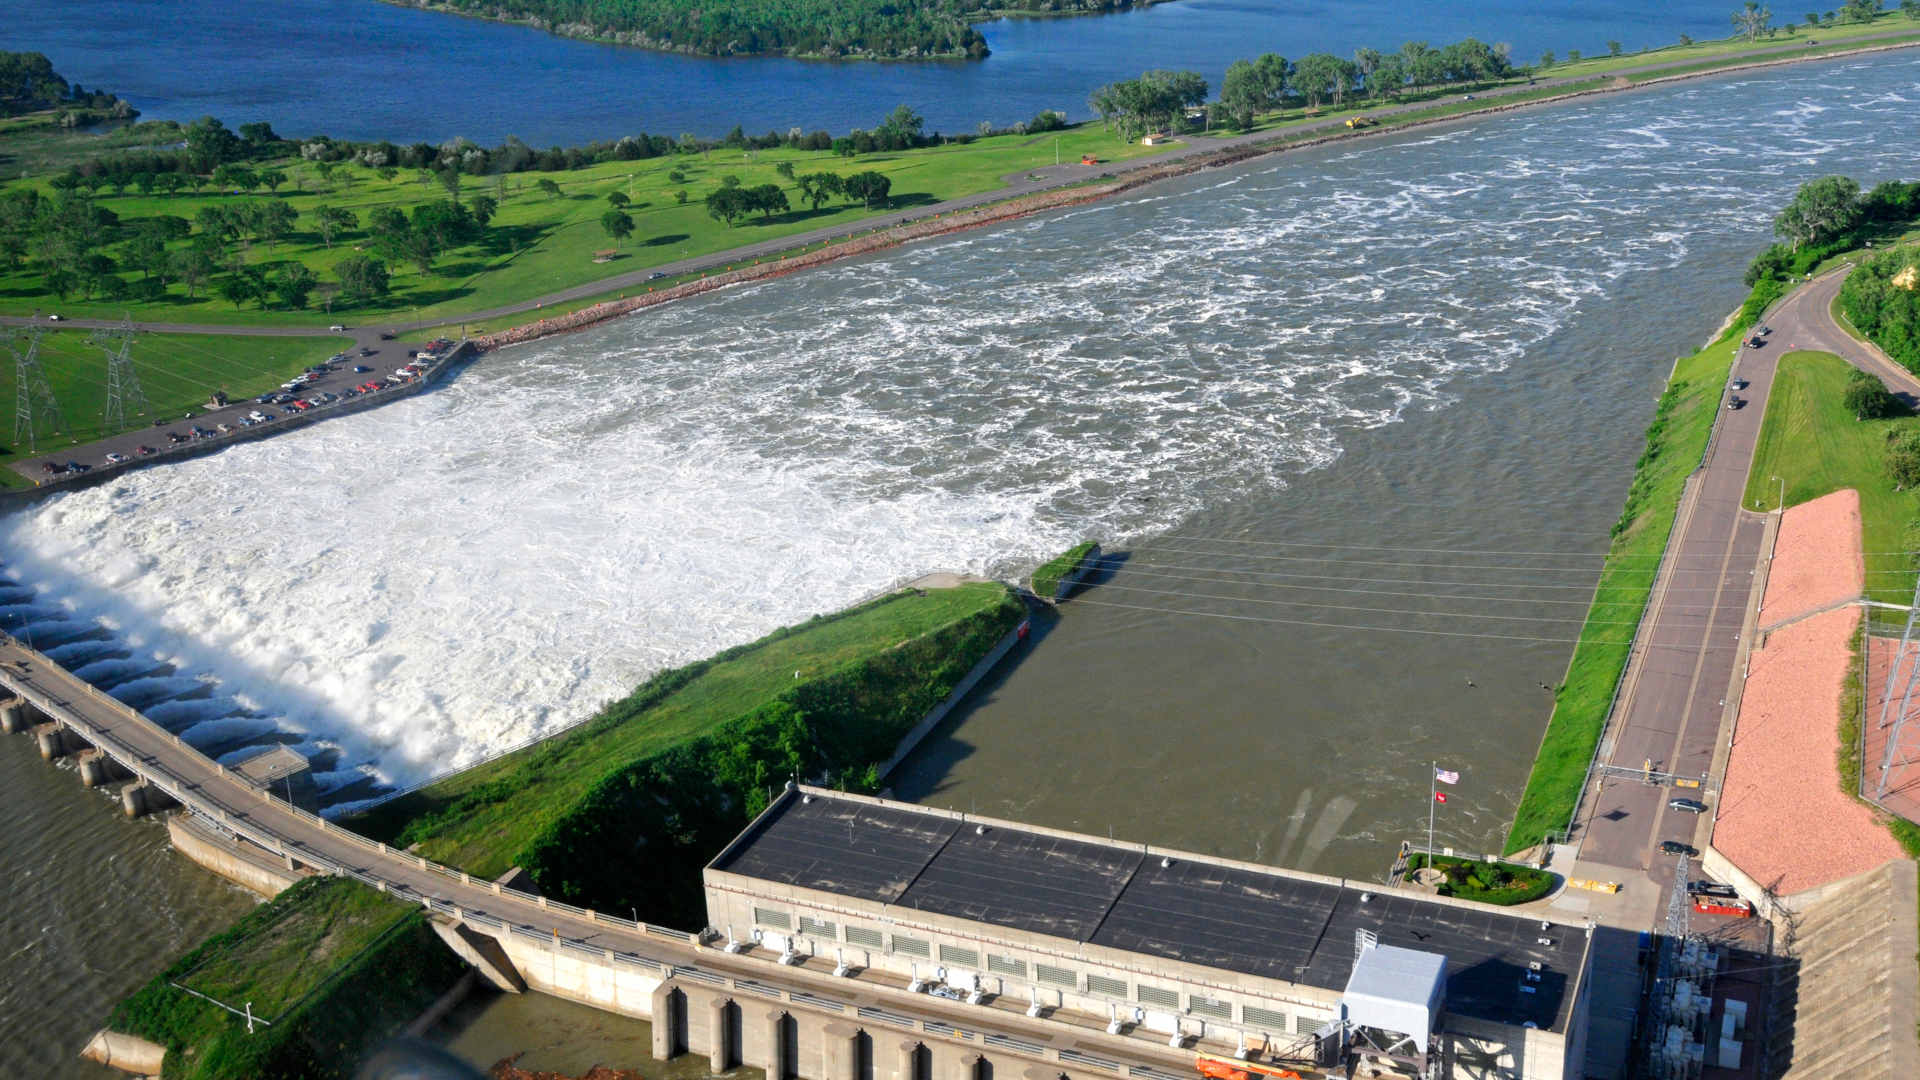 In 2011, unprecedented rainfall flooded the Missouri River. The Gavins Point Dam and others along the river released record water flows, and the cities and plains of several states were flooded.